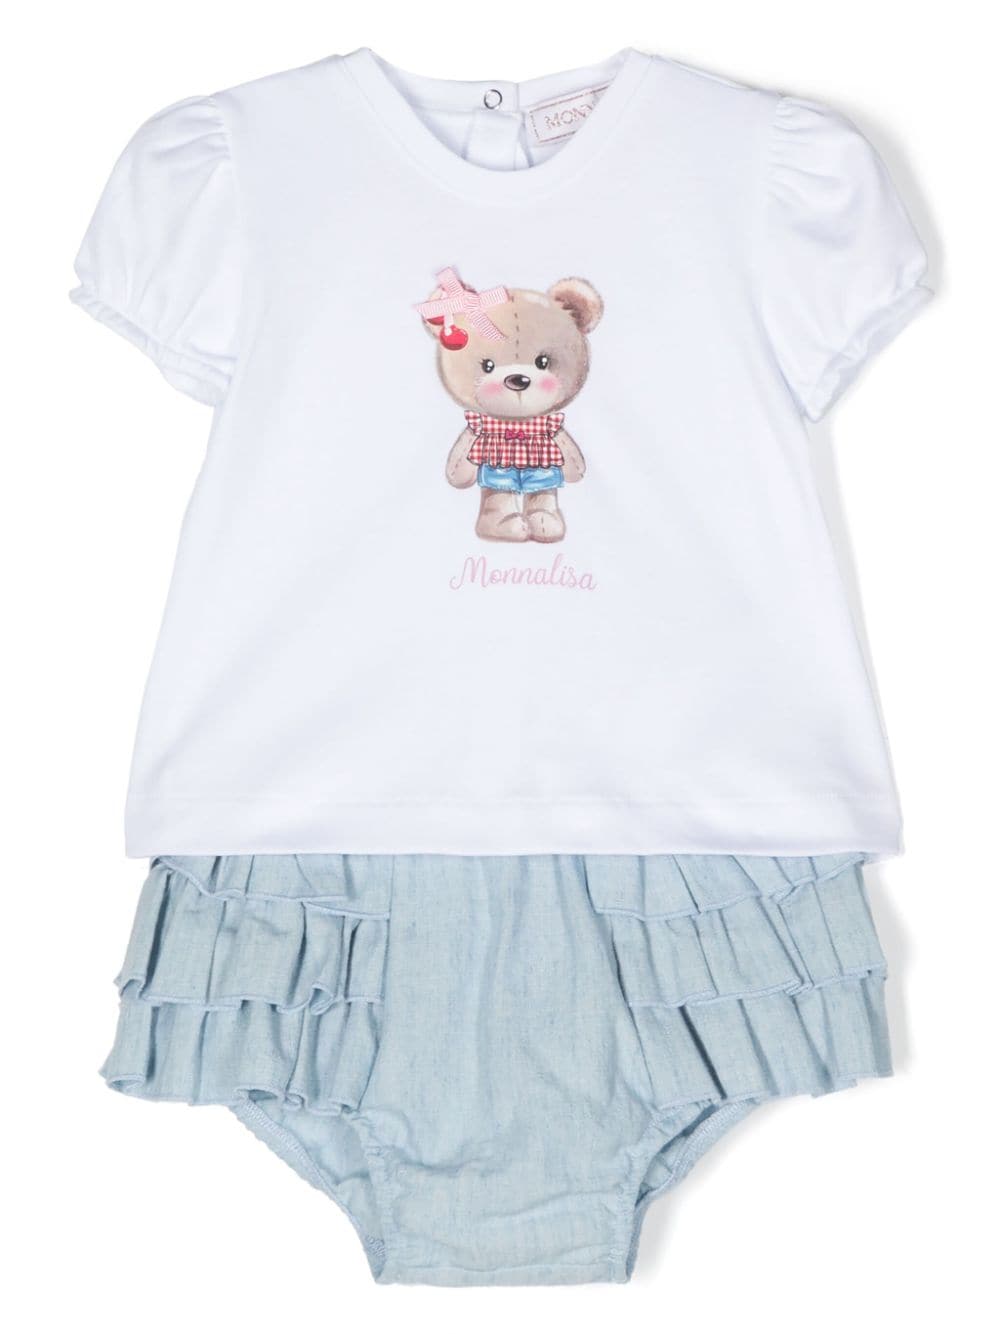 White/light blue baby girl outfit